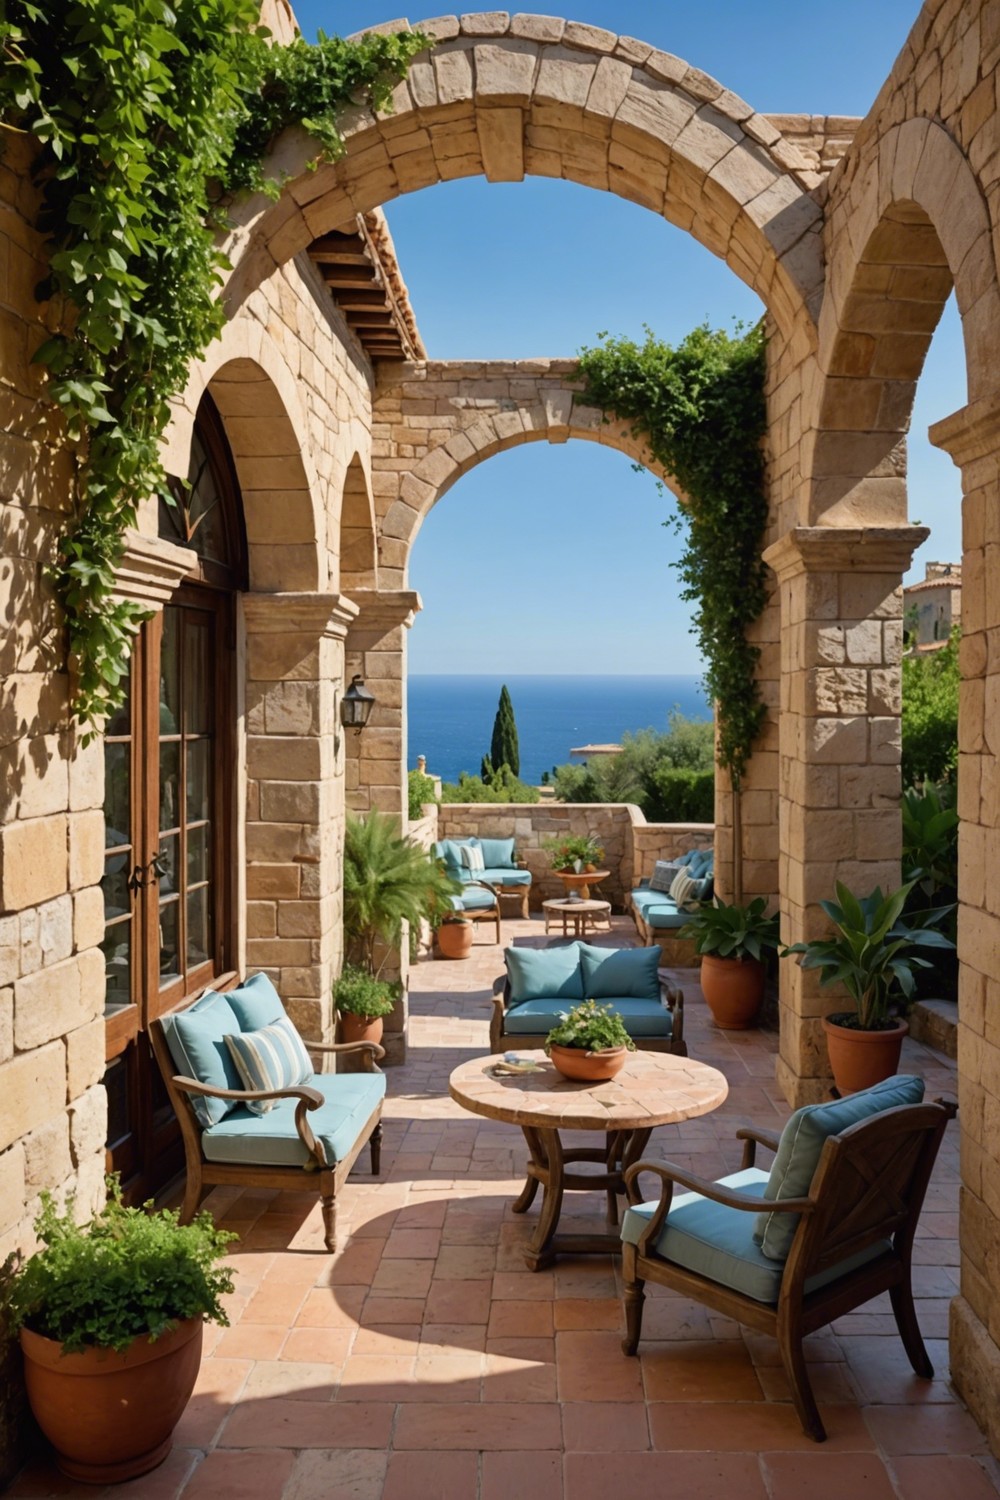 Mediterranean-Inspired Patio with Arches